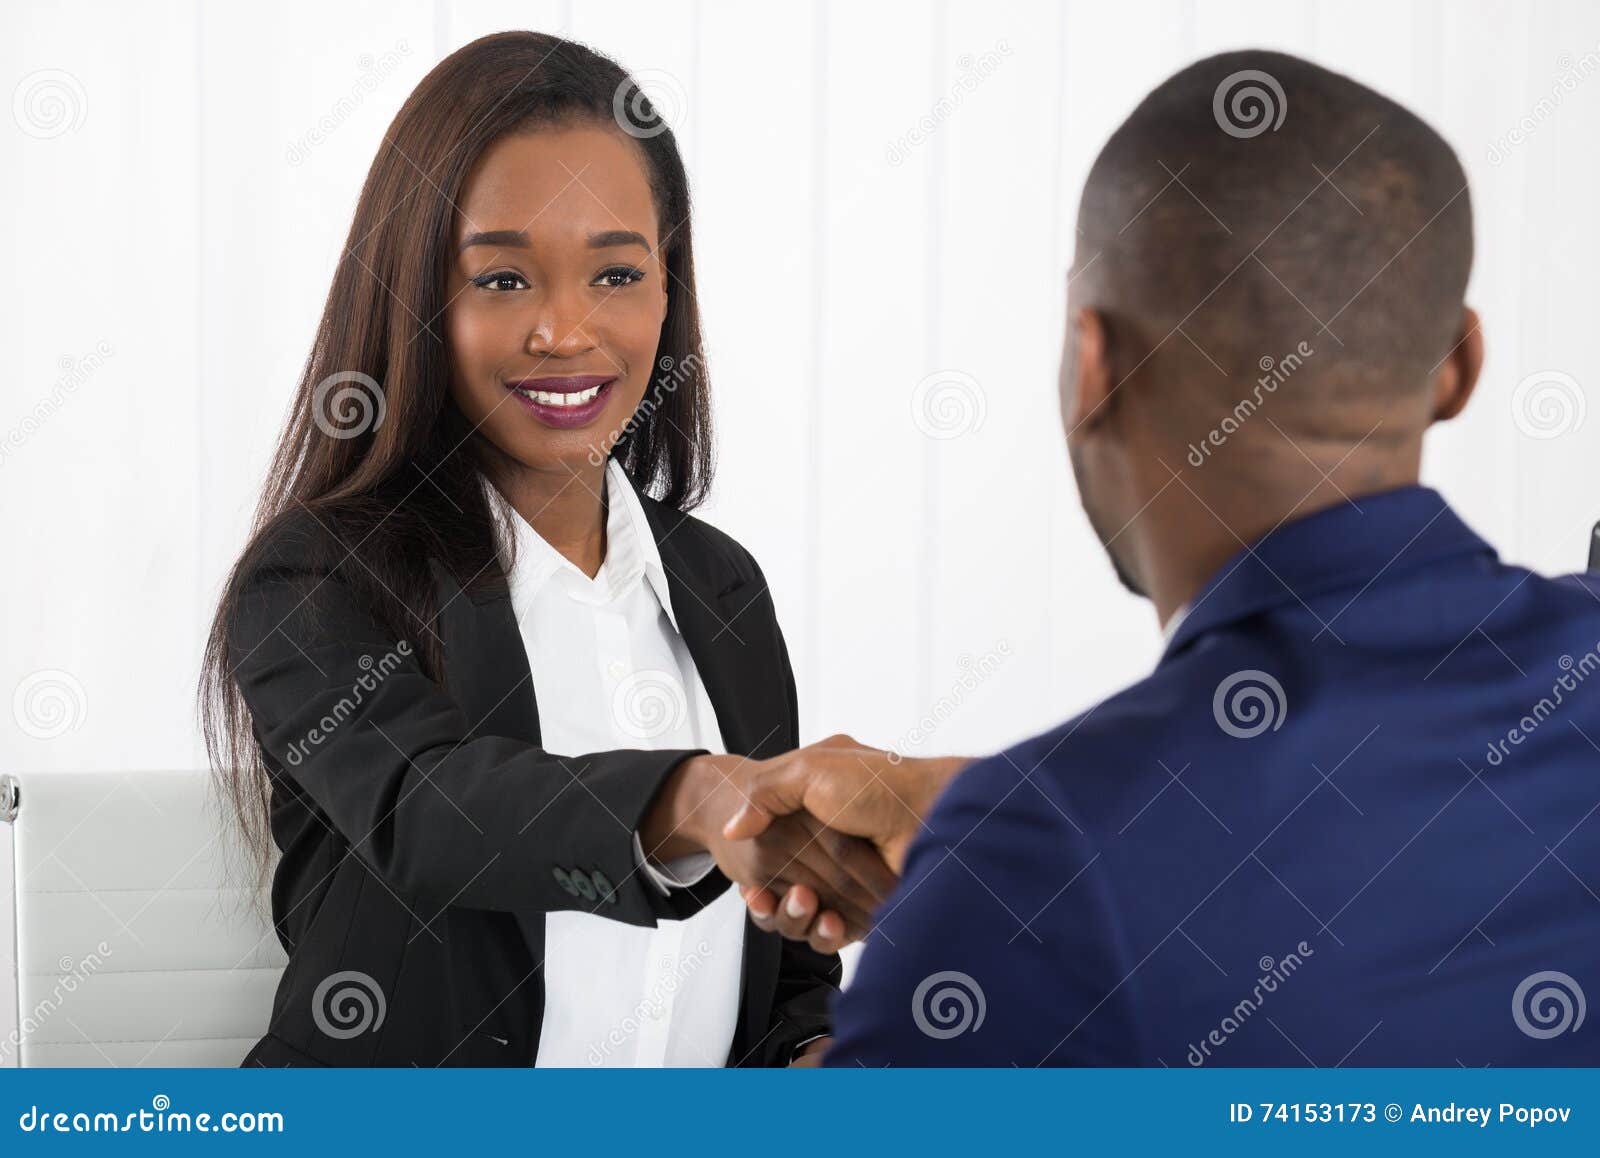 two businesspeople shaking hands at office